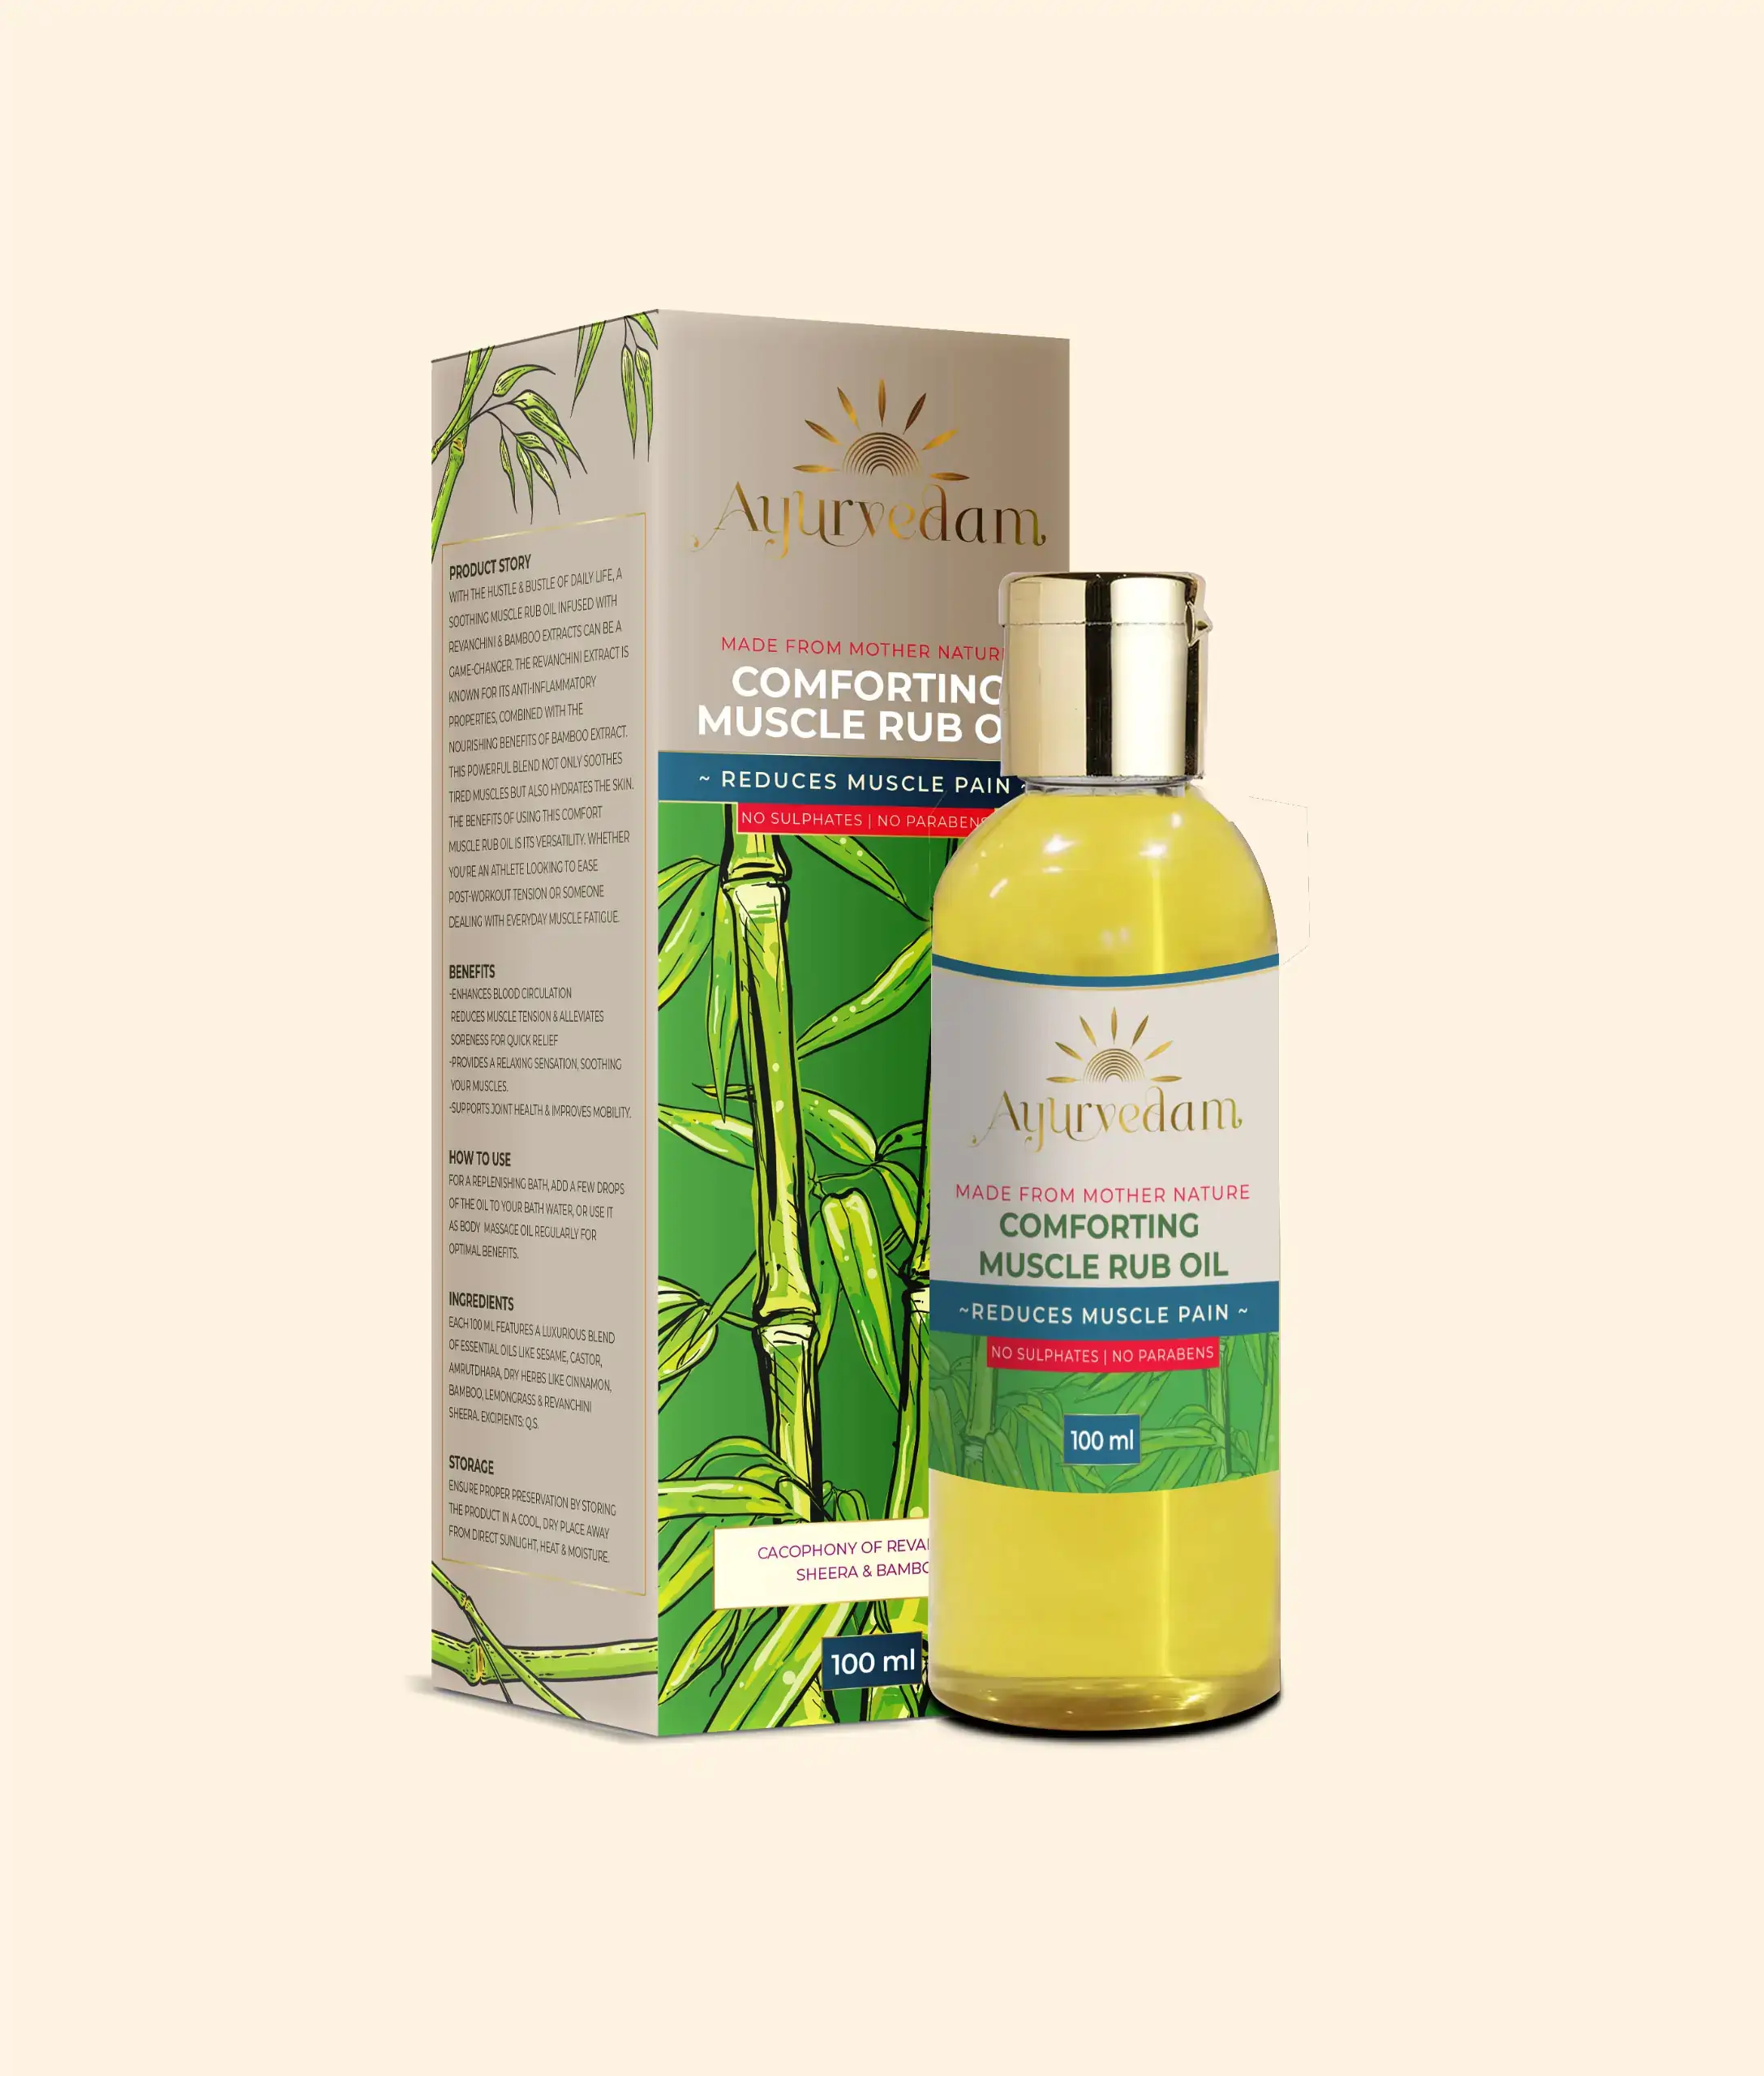 Comforting Muscle Rub Oil, an ayurvedic body massage oil along with its package by Ayurvedam